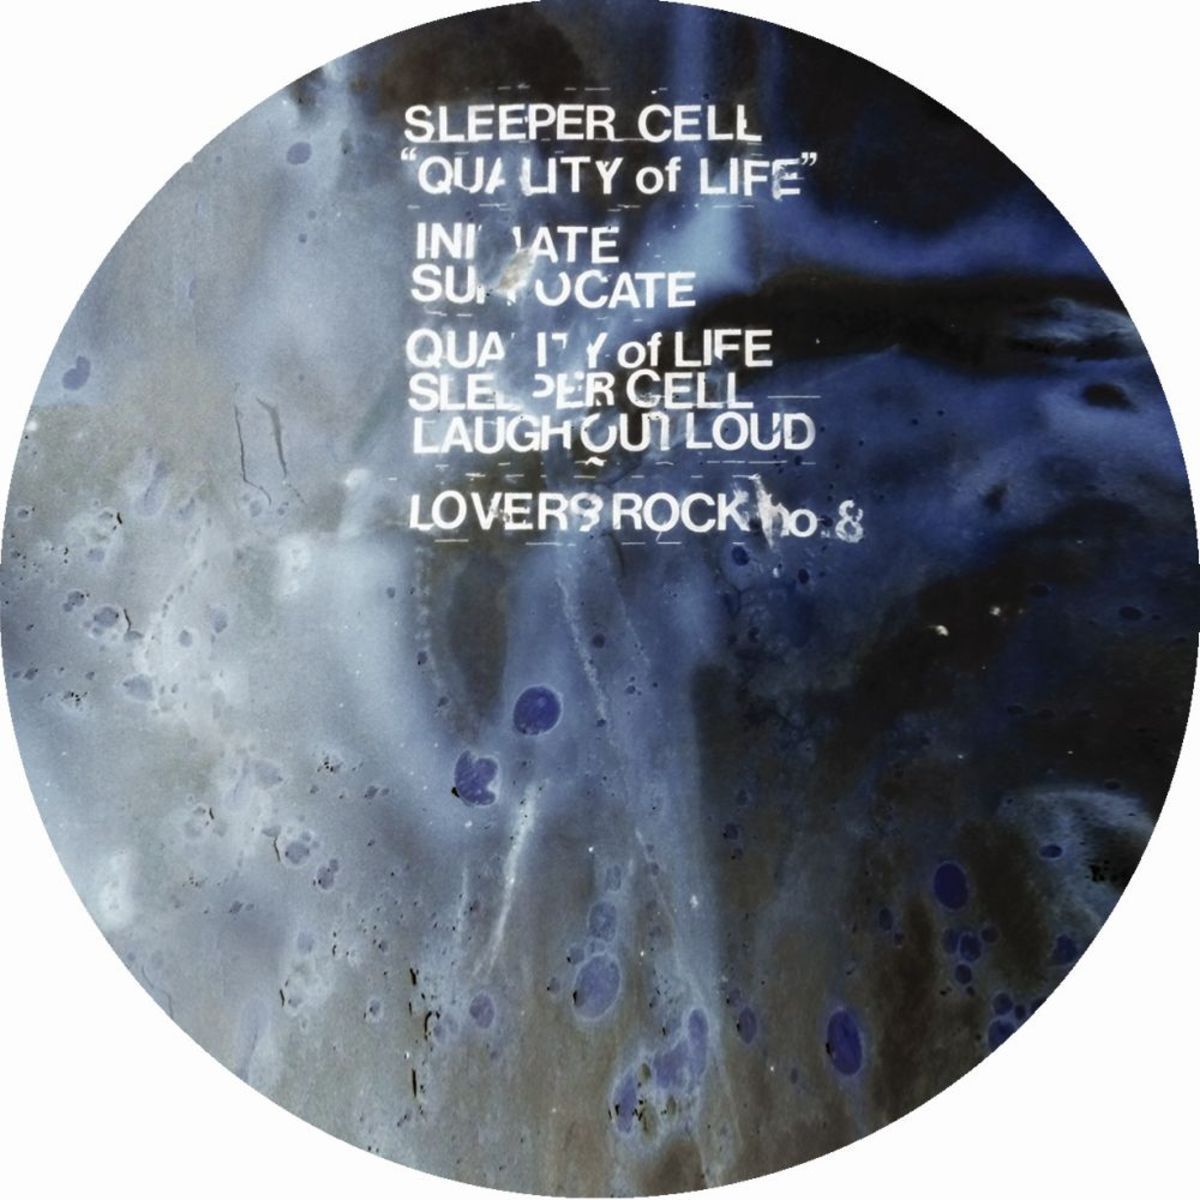 000-Sleeper Cell-Quality Of Life- [LR NP. 8]